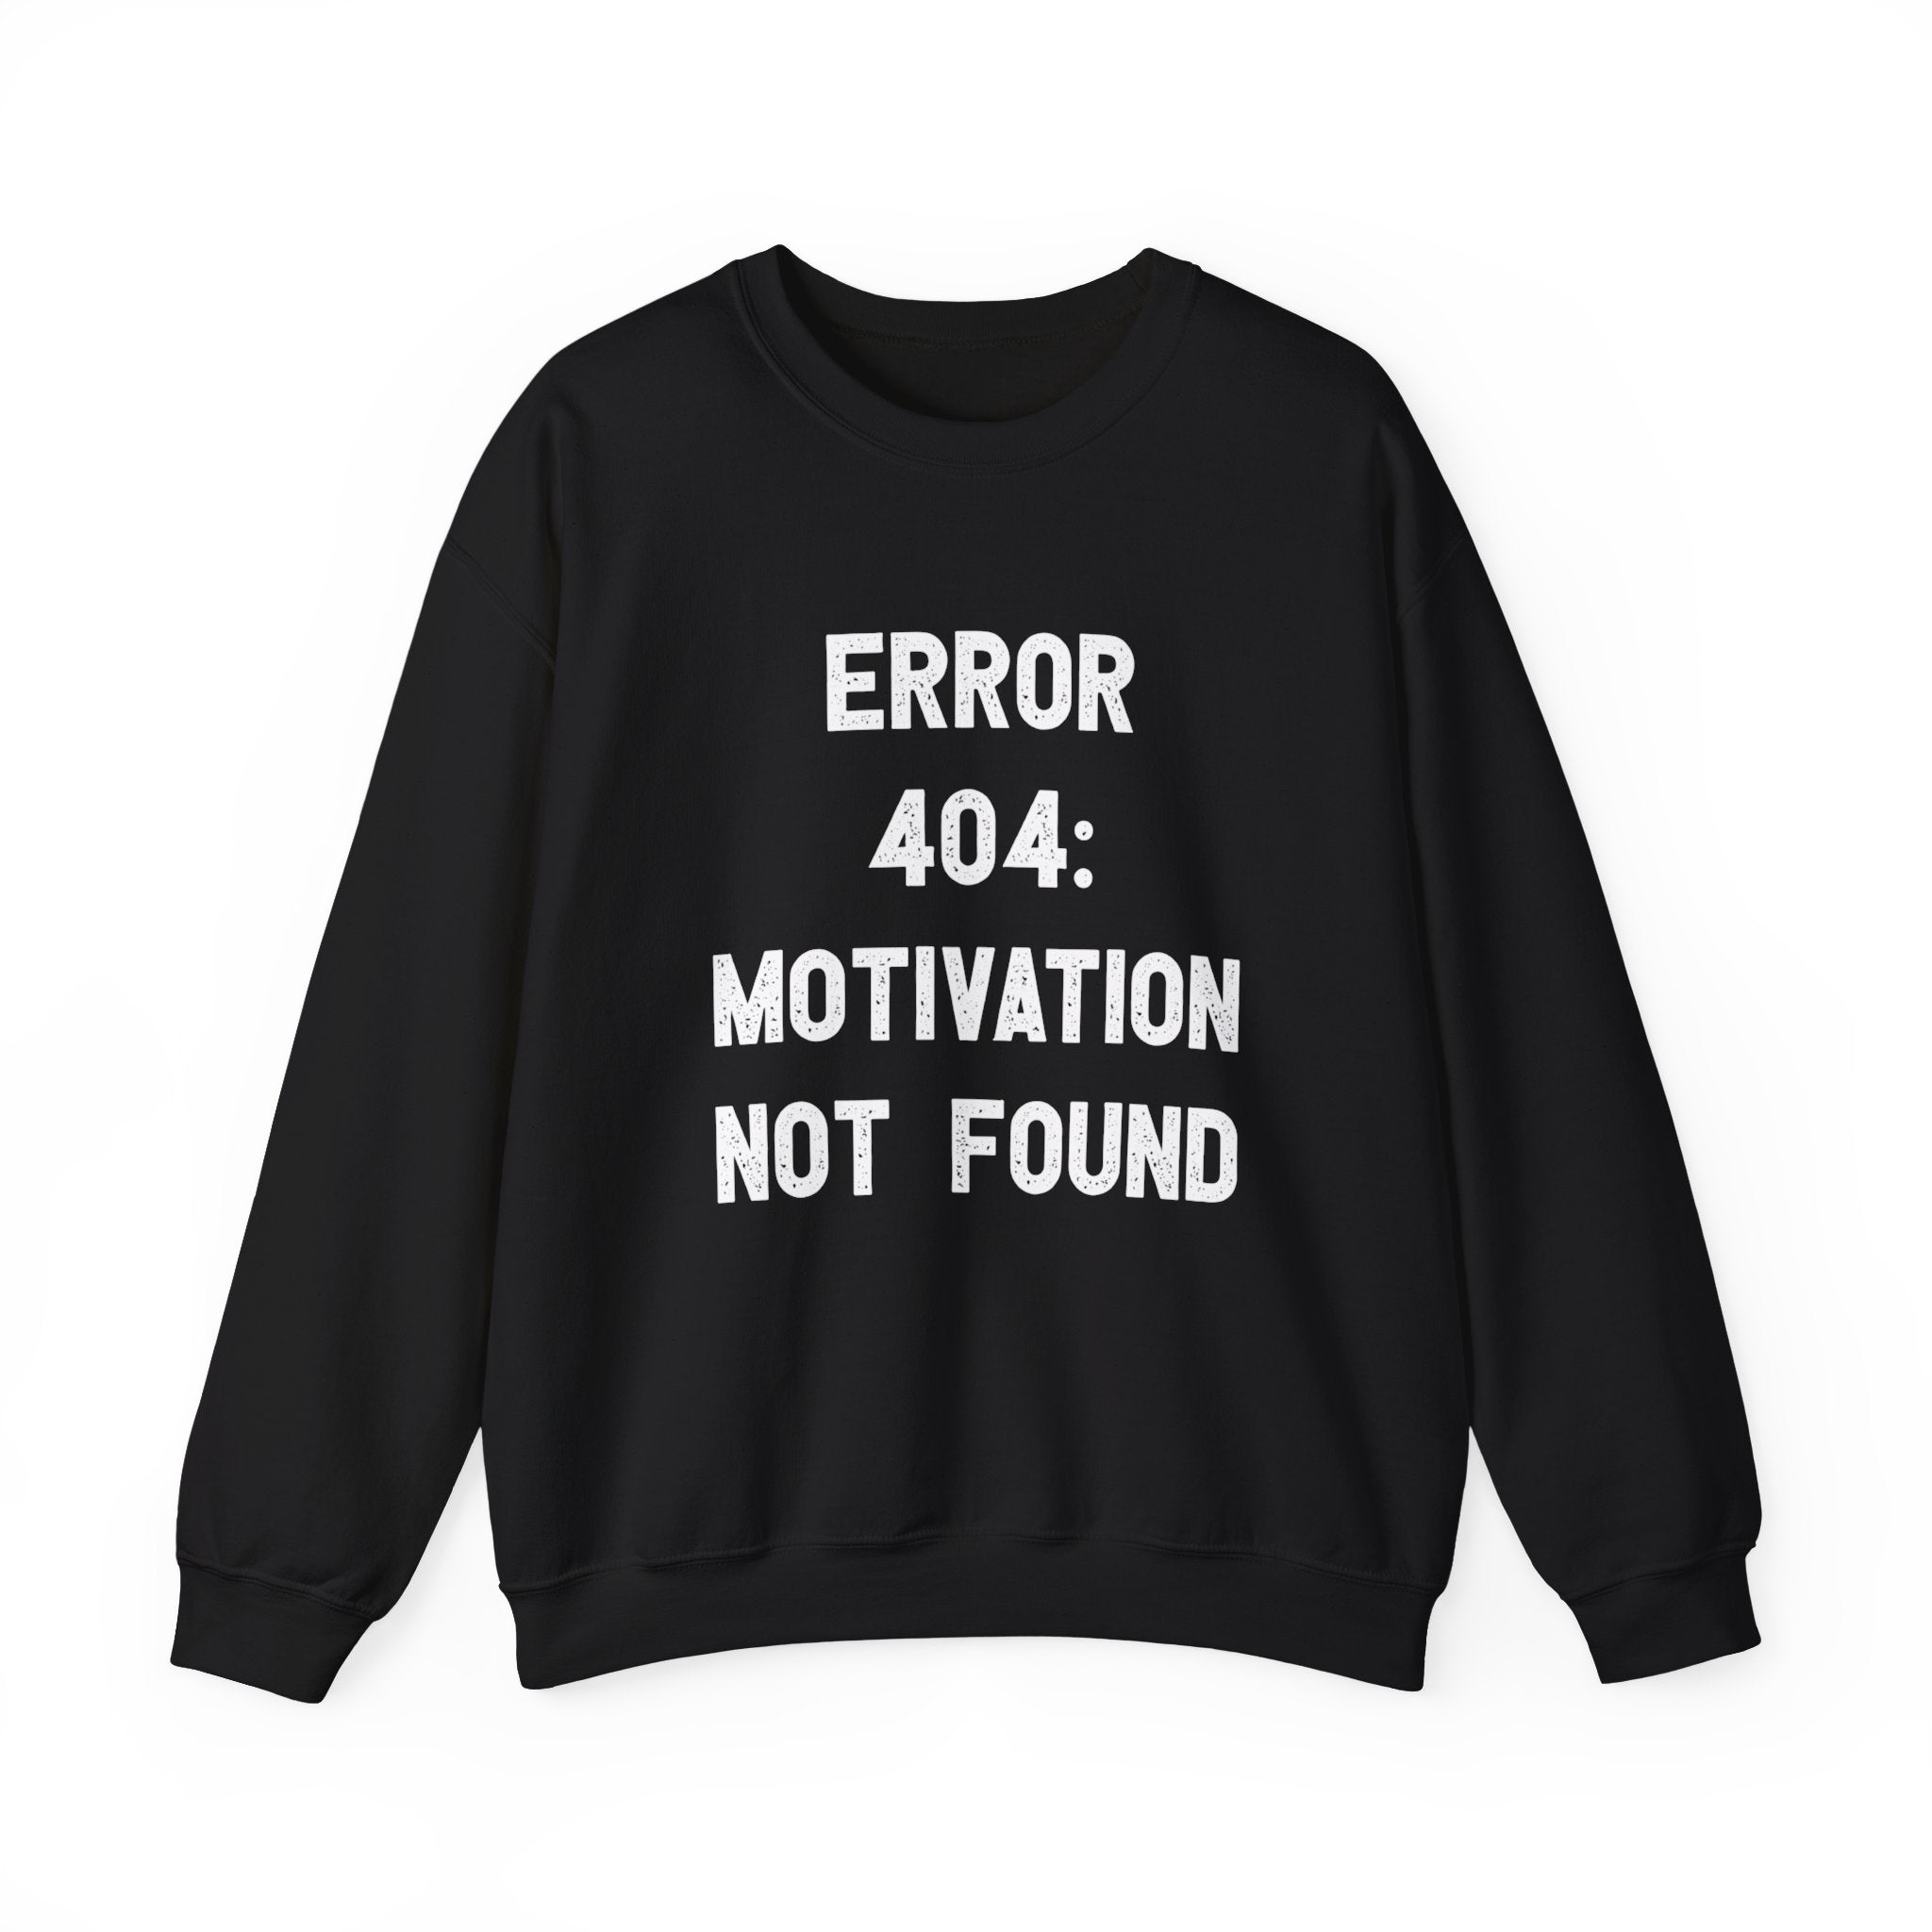 Black sweatshirt with the text “ERROR 404: MOTIVATION NOT FOUND” in white letters on the front. Ideal for those colder months, this Error 404: Motivation not found - Sweatshirt promises to keep you enveloped in cozy comfort while making a bold statement.